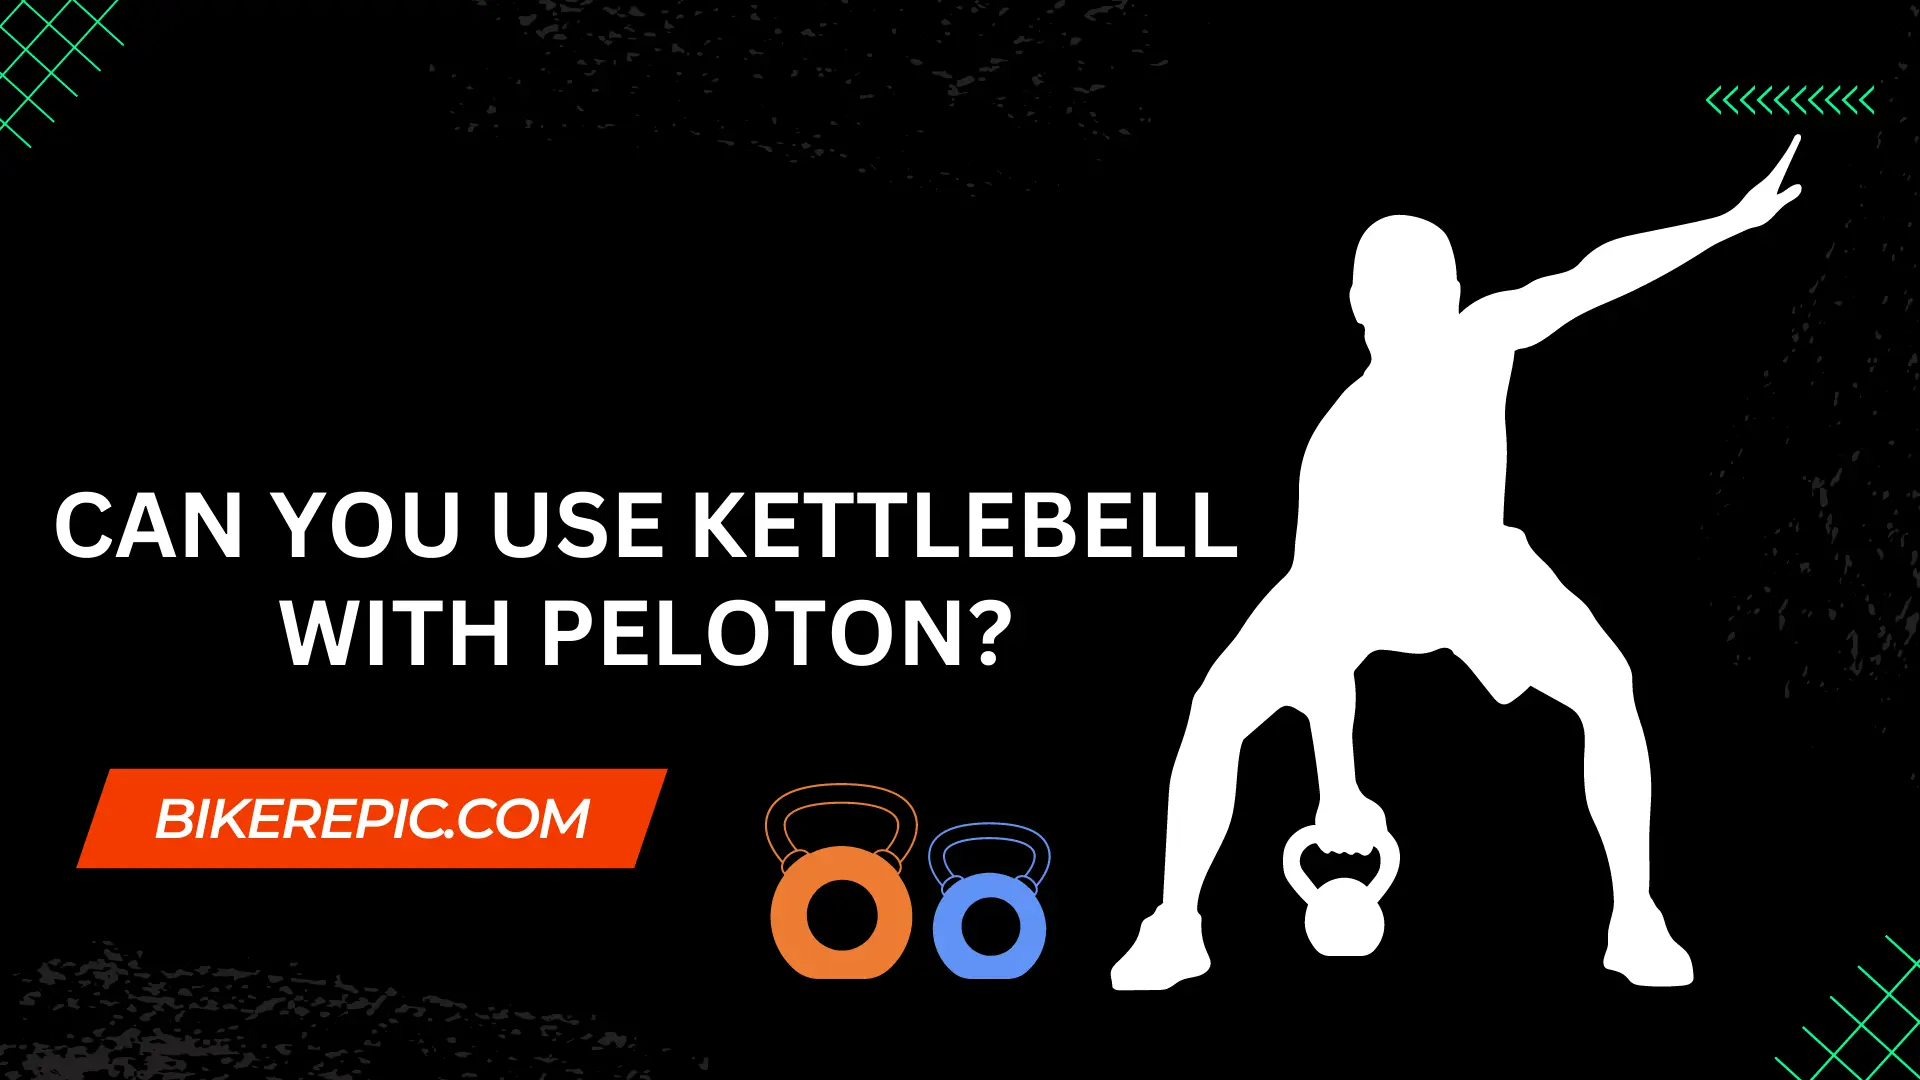 Can You Use Kettlebell With Peloton?